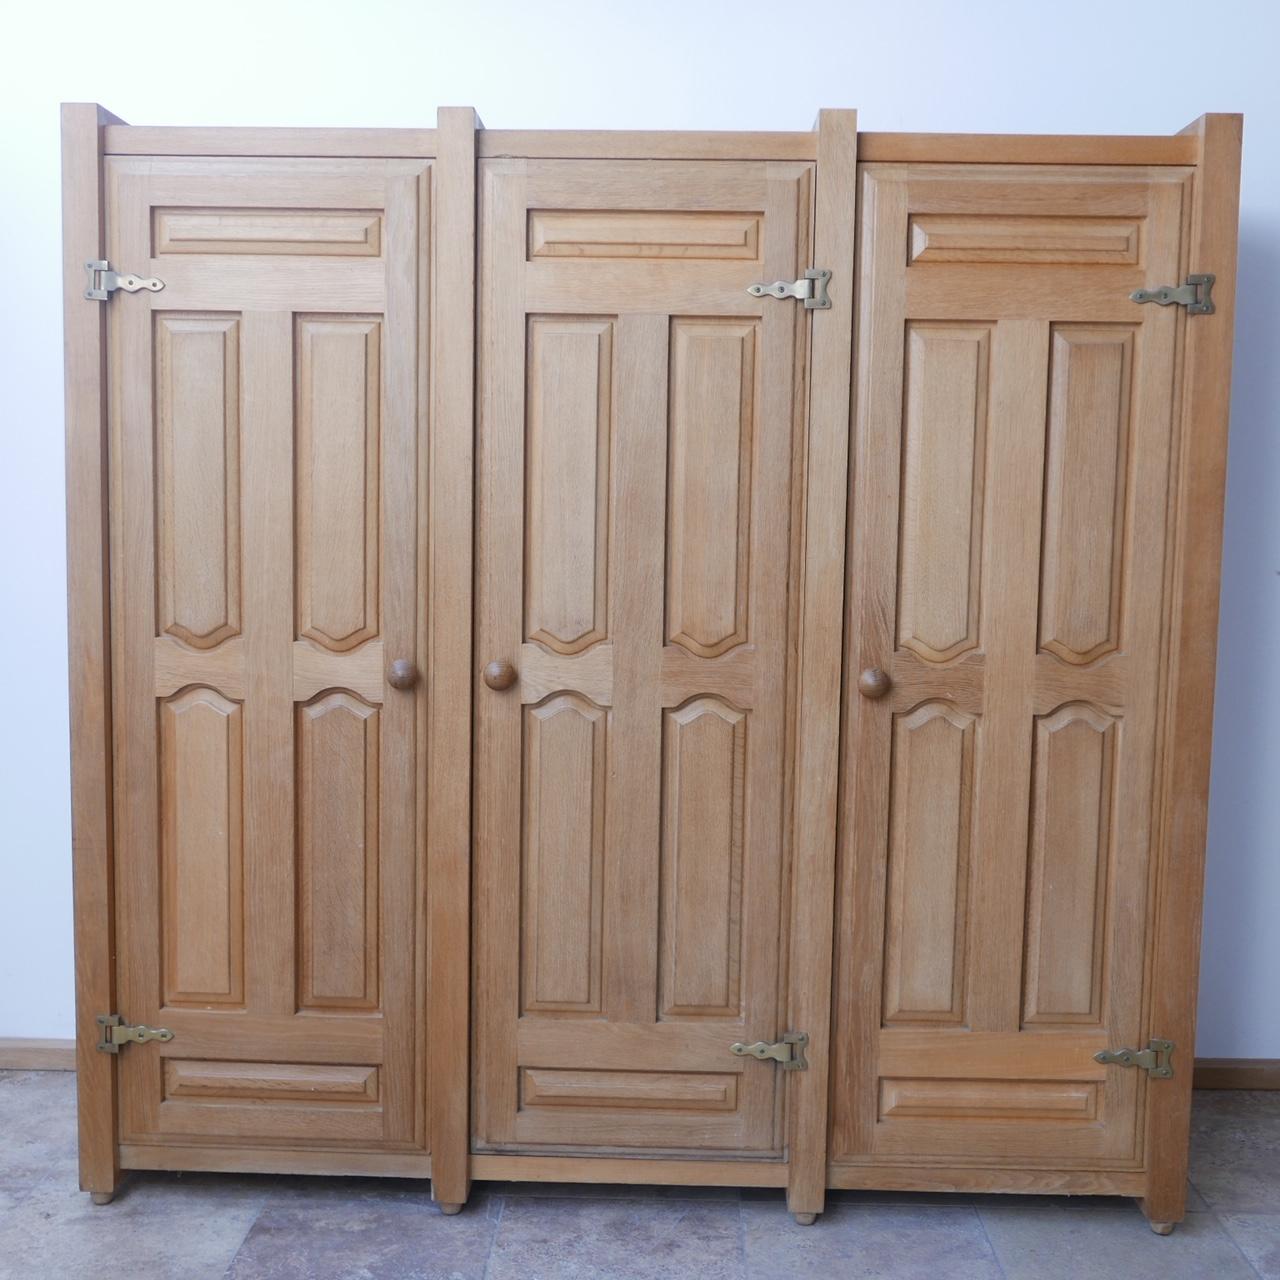 A three door cabinet/wardrobe from design legends Guillerme et Chambron. 

France, c1960s. 

Oak and brass. 

Generally good condition, some wear commensurate with age. 

Dimensions: 183 W x 53 D x 180 H in cm.

Delivery: POA.

 